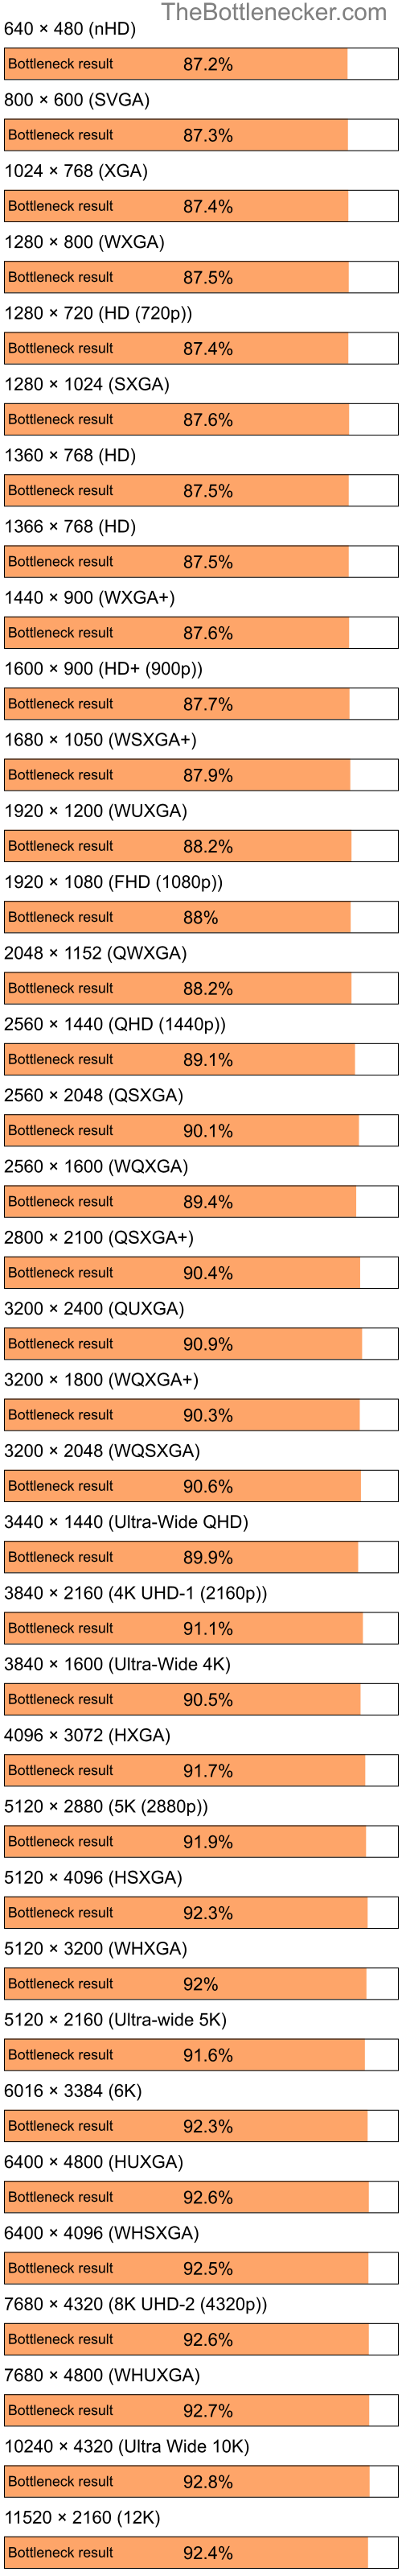 Bottleneck results by resolution for Intel Celeron and AMD Mobility Radeon 9000 IGP in General Tasks